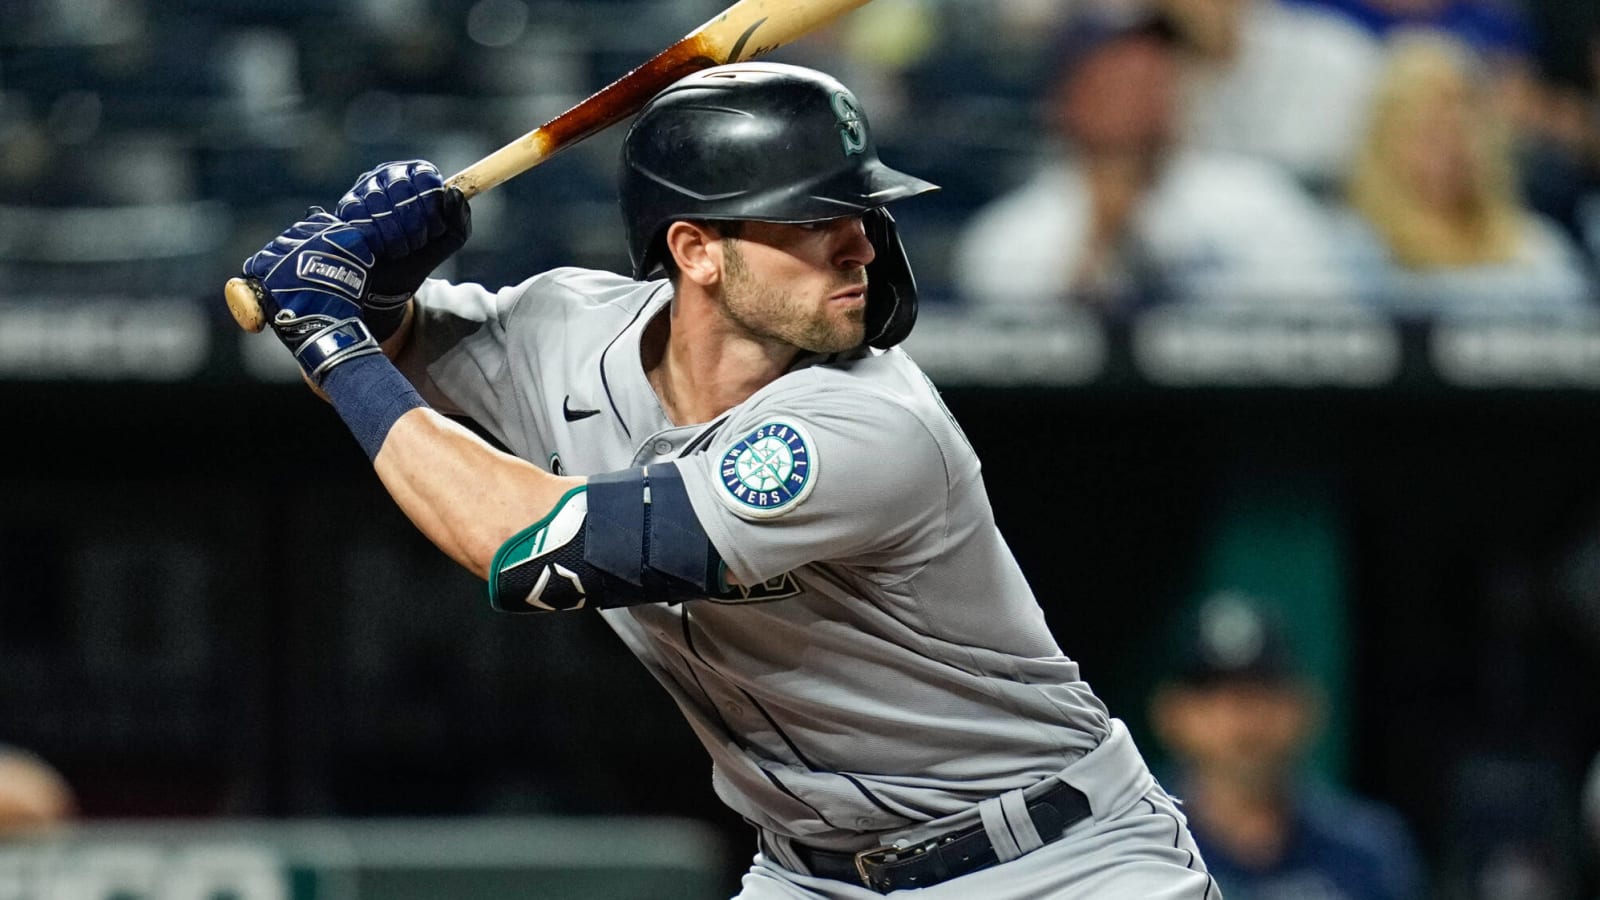 Is Mitch Haniger entering his final season with the Mariners?